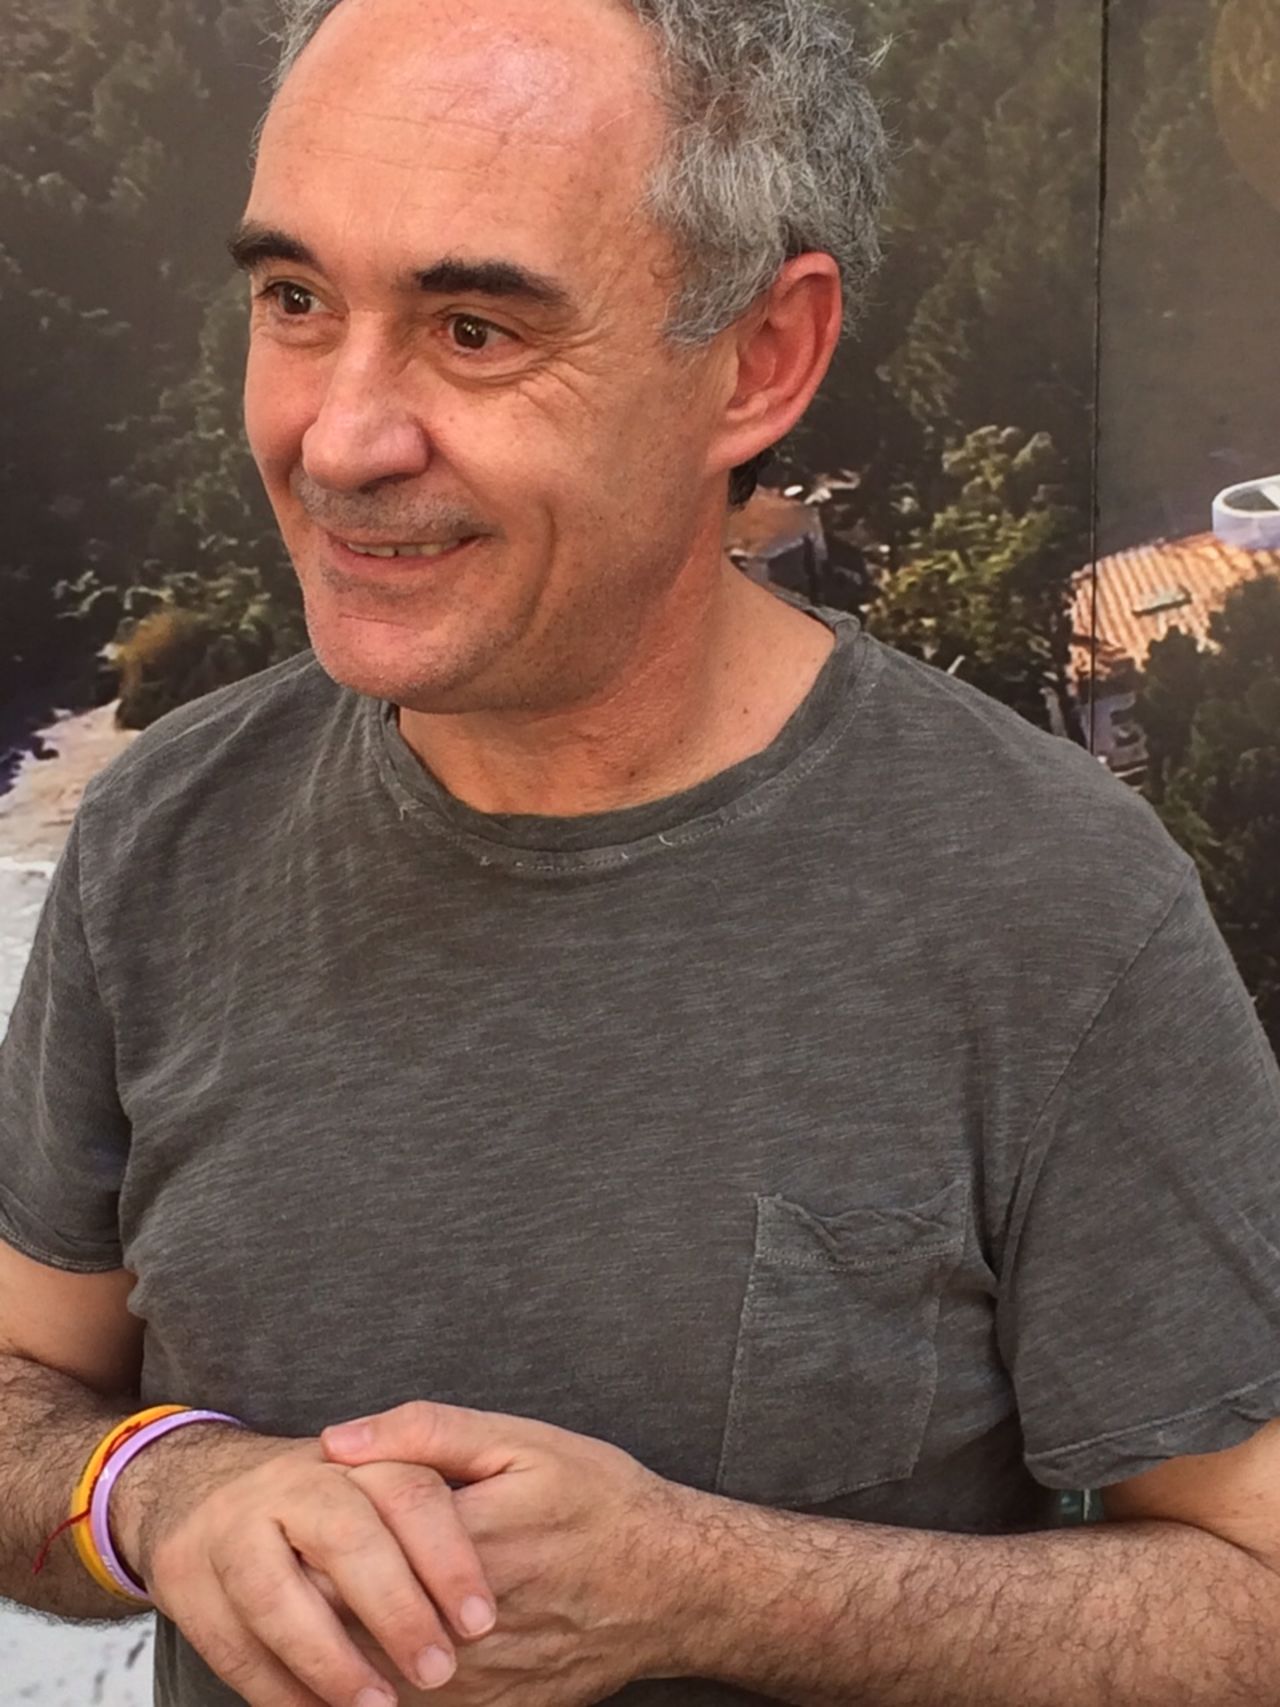 Ferran Adria became a cook after joining the army at age 19. 